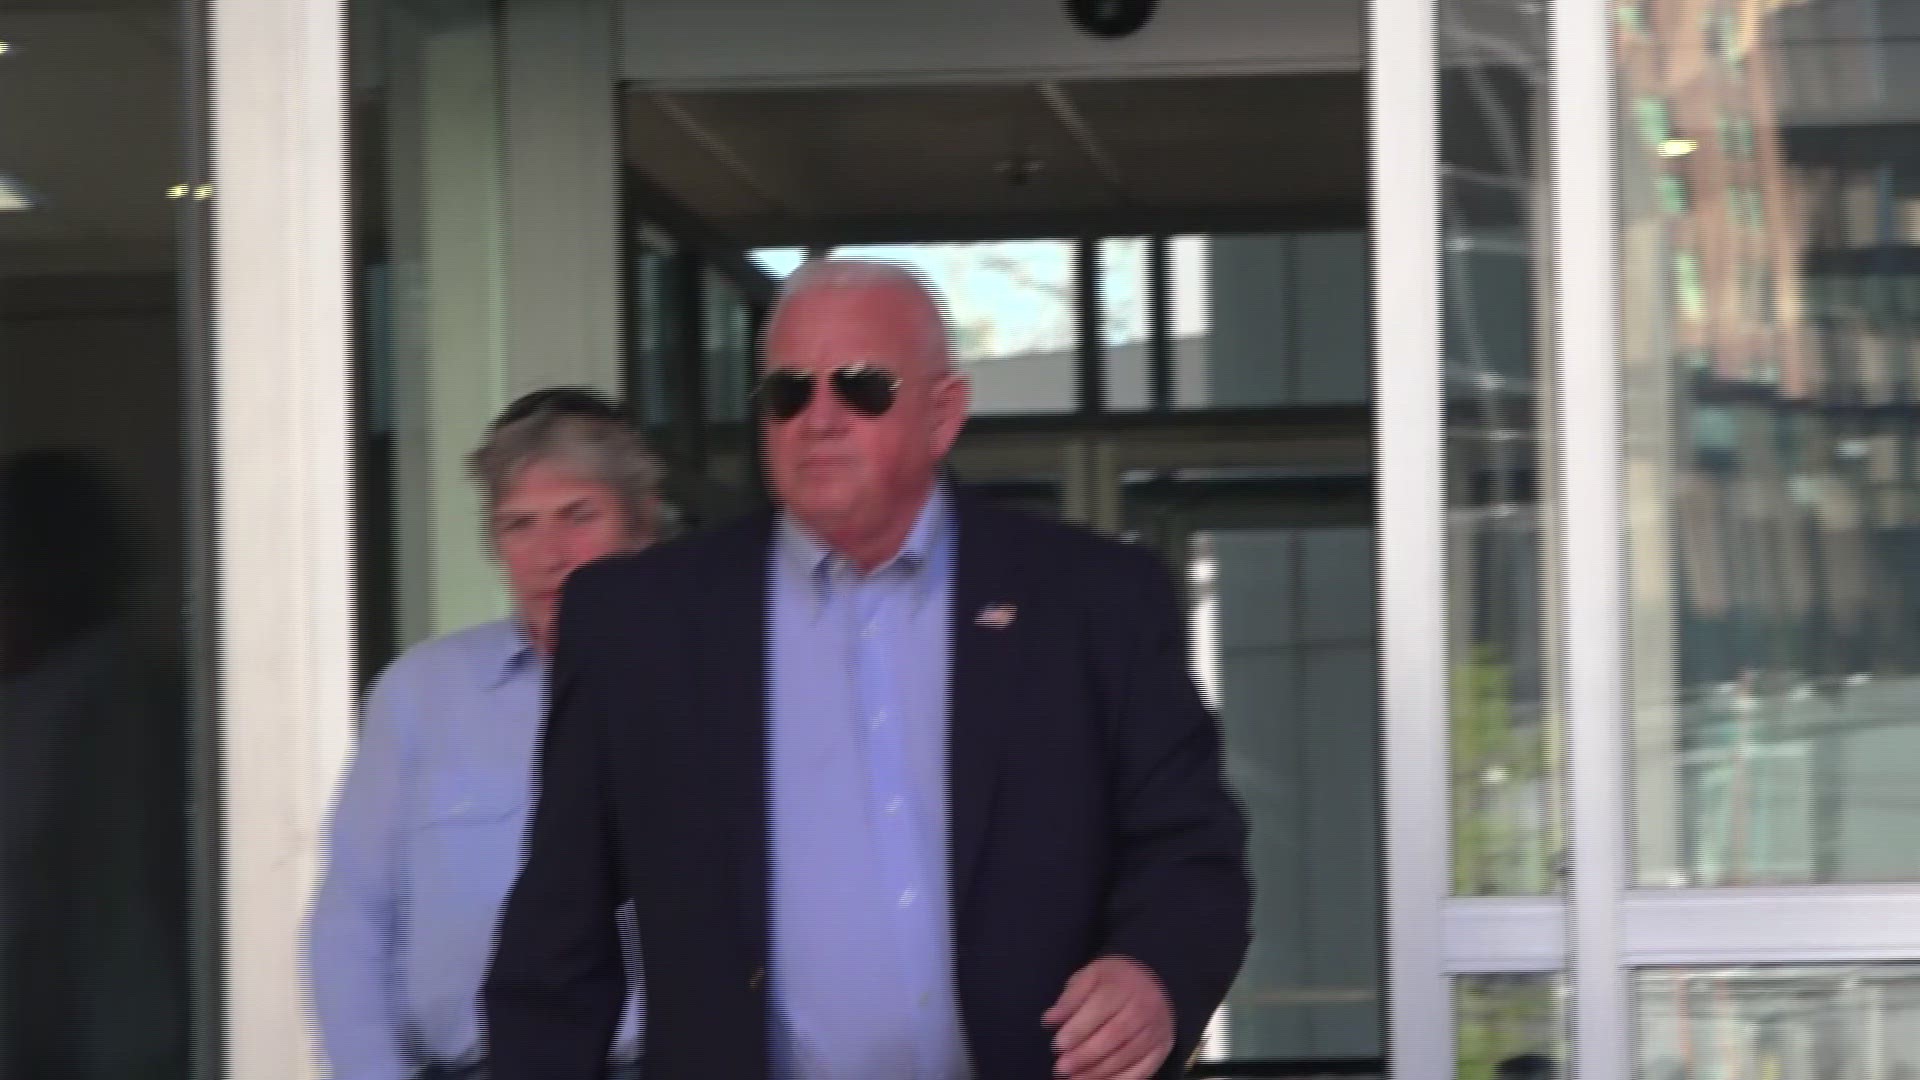 Frederick County Sheriff Chuck Jenkins has been elected five times and says he's "100% cooperating" despite his indictment.